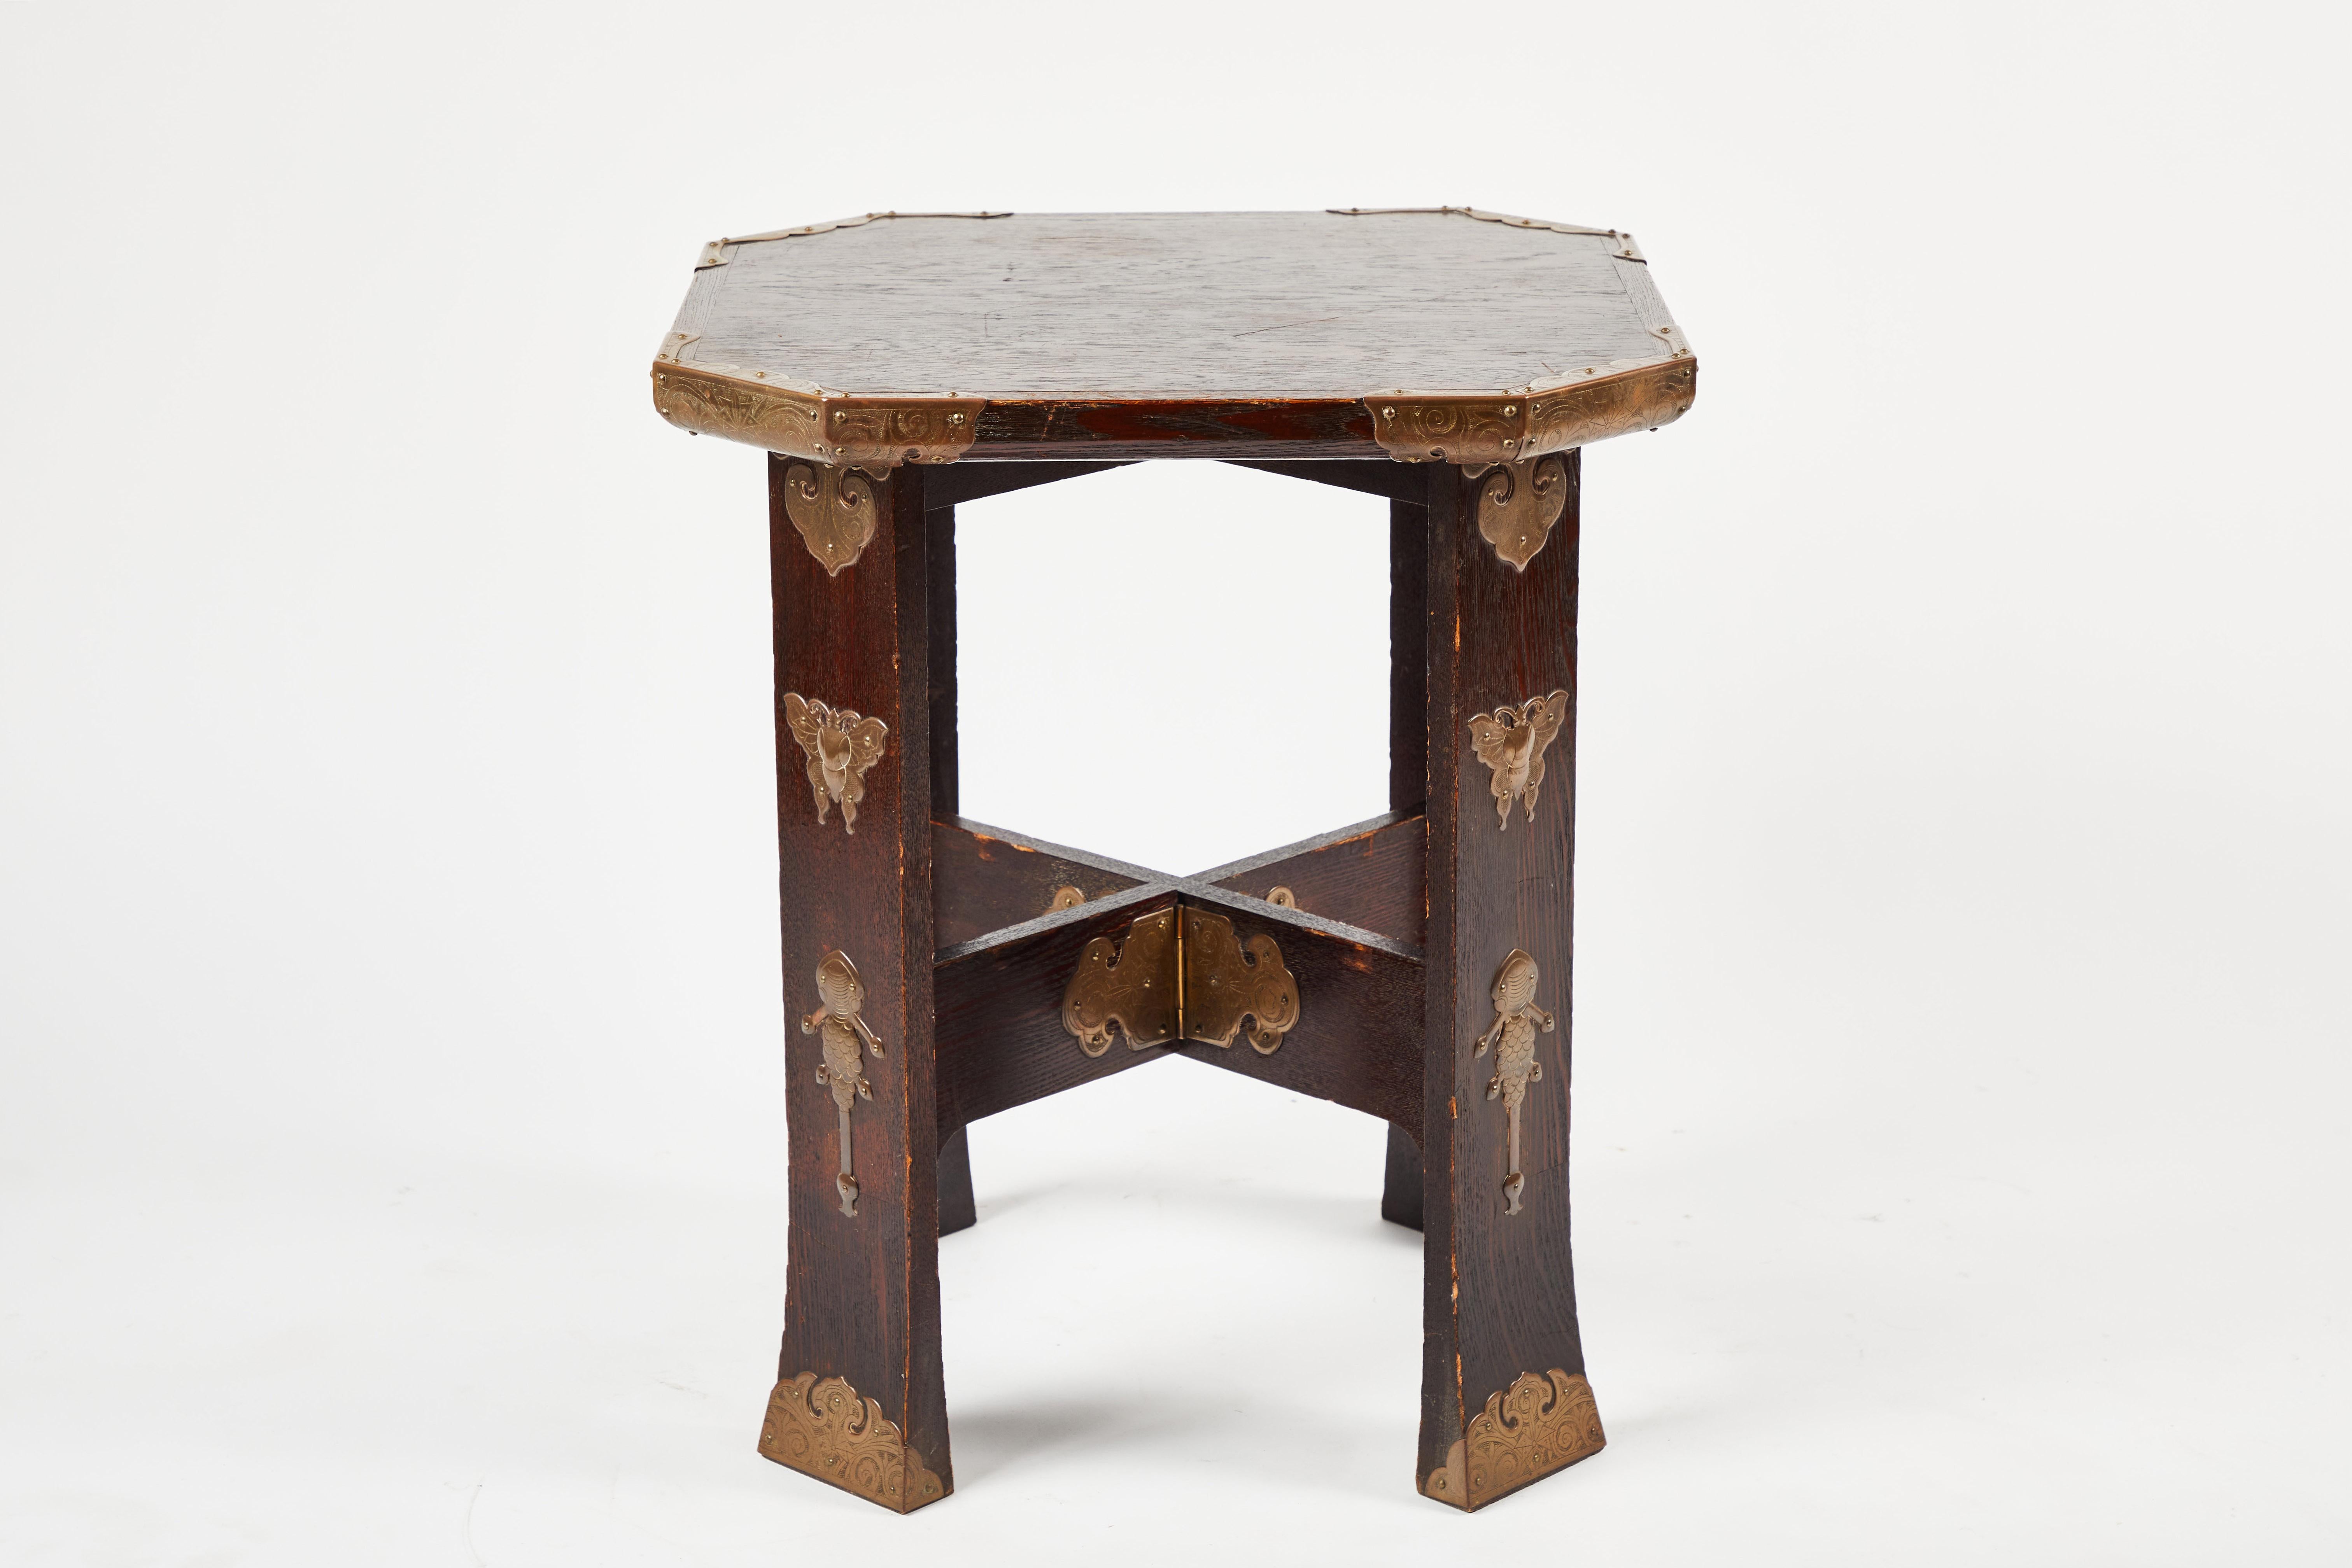 Exceptionally rare and beautiful antique side table from the Korean peninsula. Finely carved removable octagonal wooden top with cast brass end caps. X Base support with additional decorative brass details; legs have decorative brass butterflies,